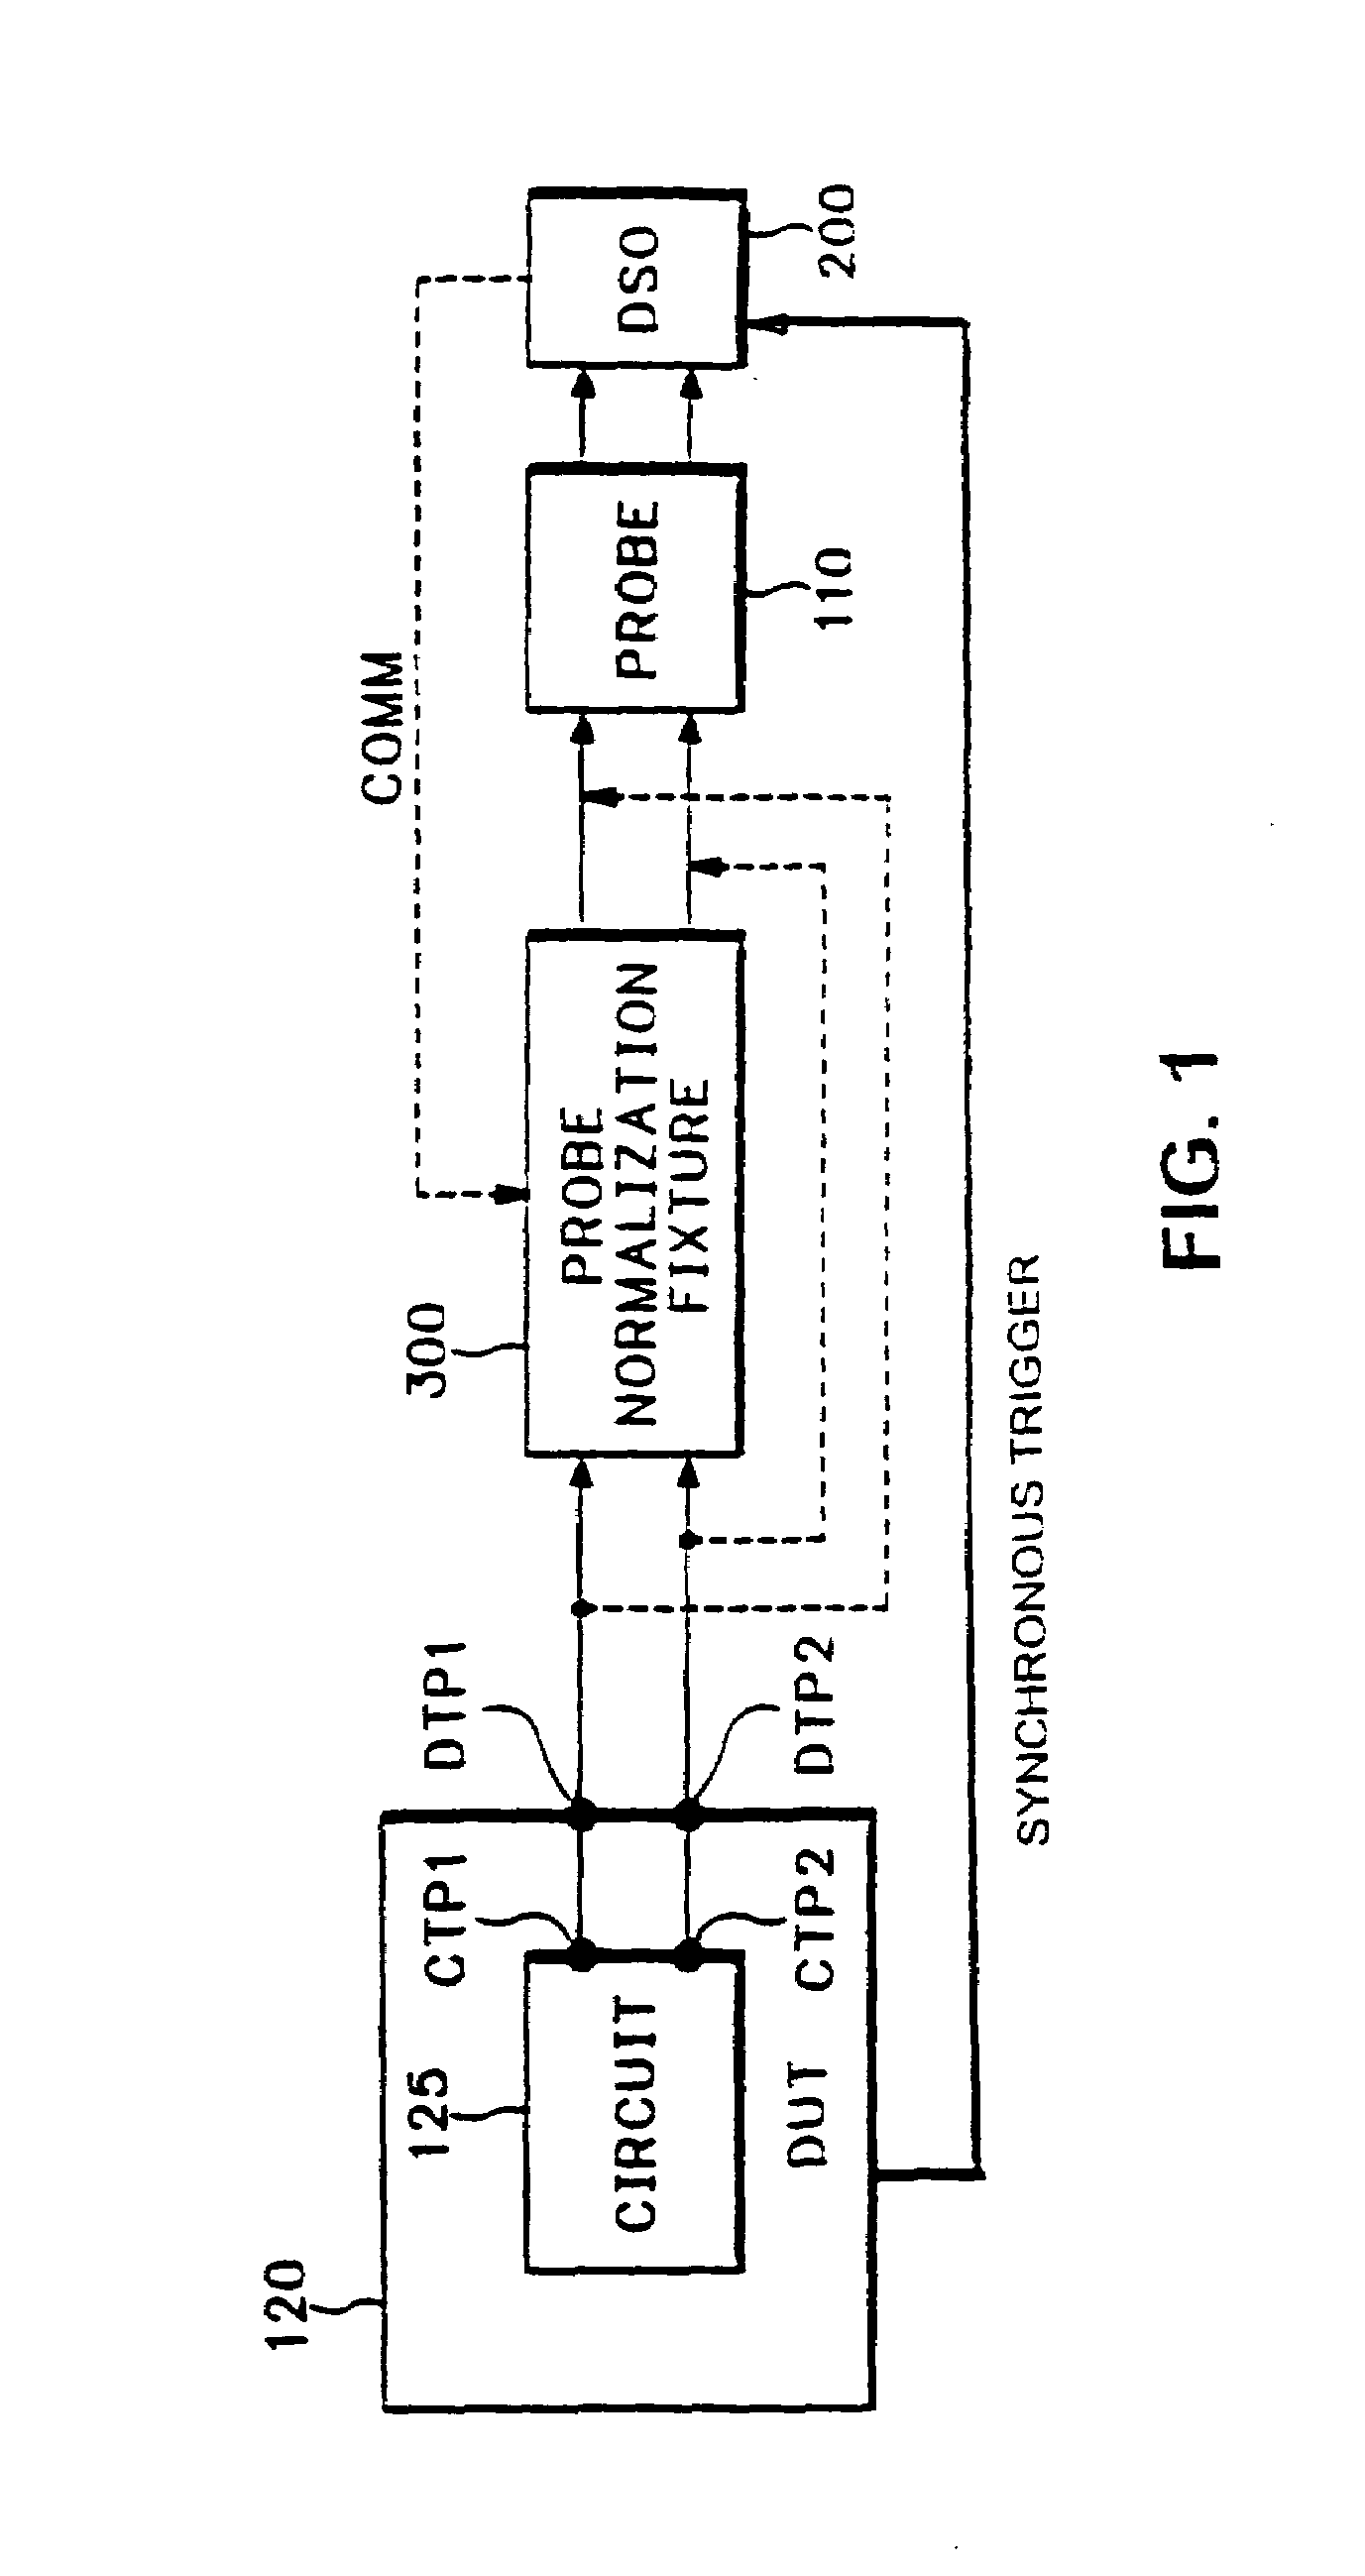 De-embed method for multiple probes coupled to a device under test